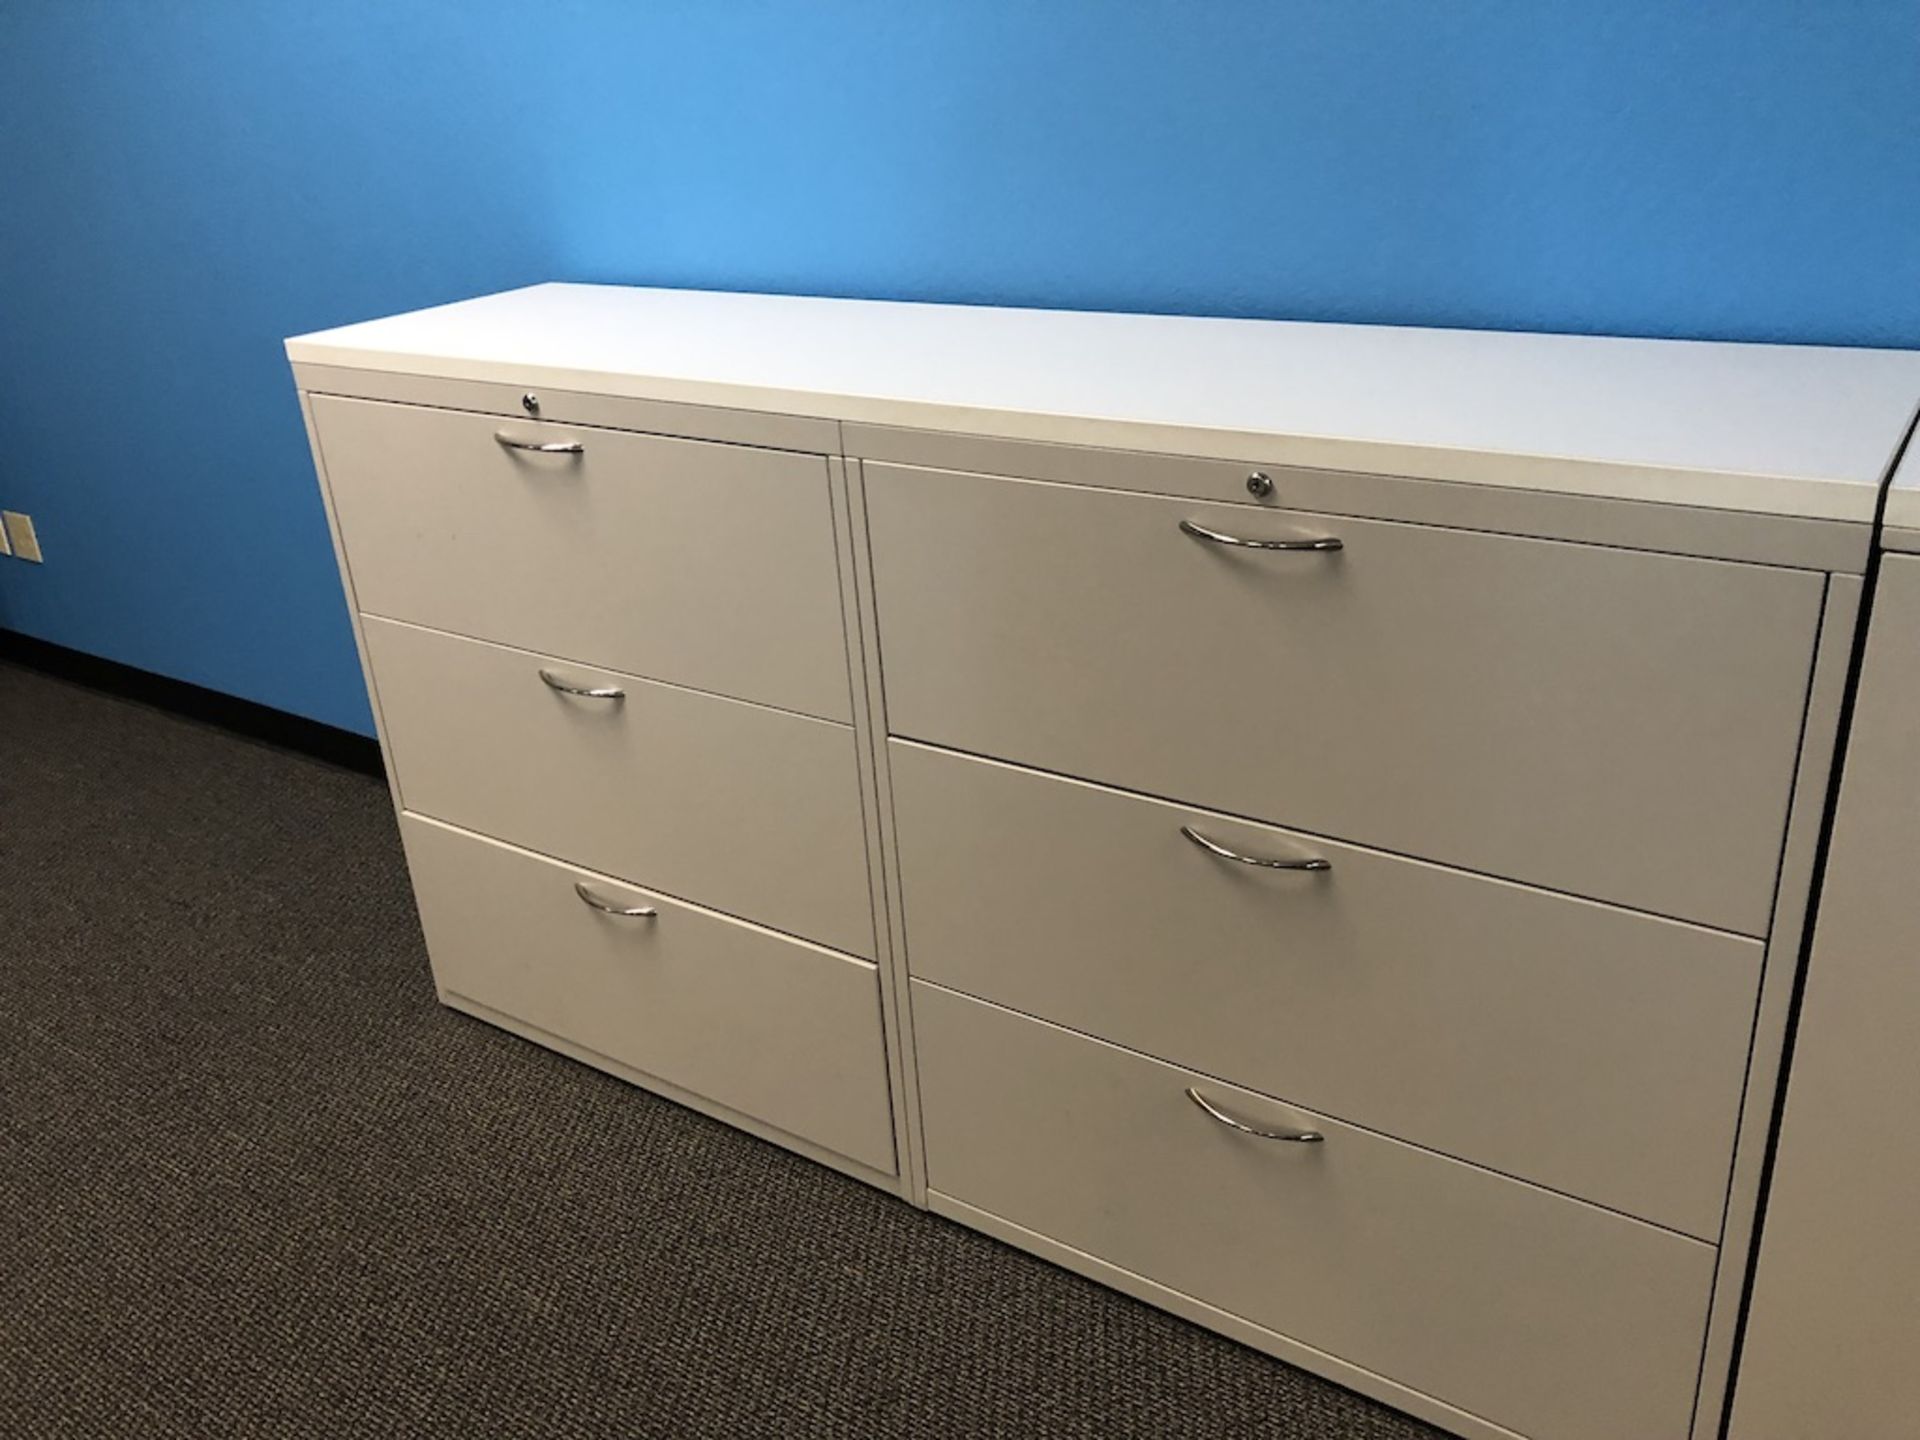 6 DRAWER OFFICE CABINET 6FT L X 18IN W X 41IN H   SCHNEIDER ELECTRIC- 6611 PRESTON AVE SUITE A - Image 3 of 5